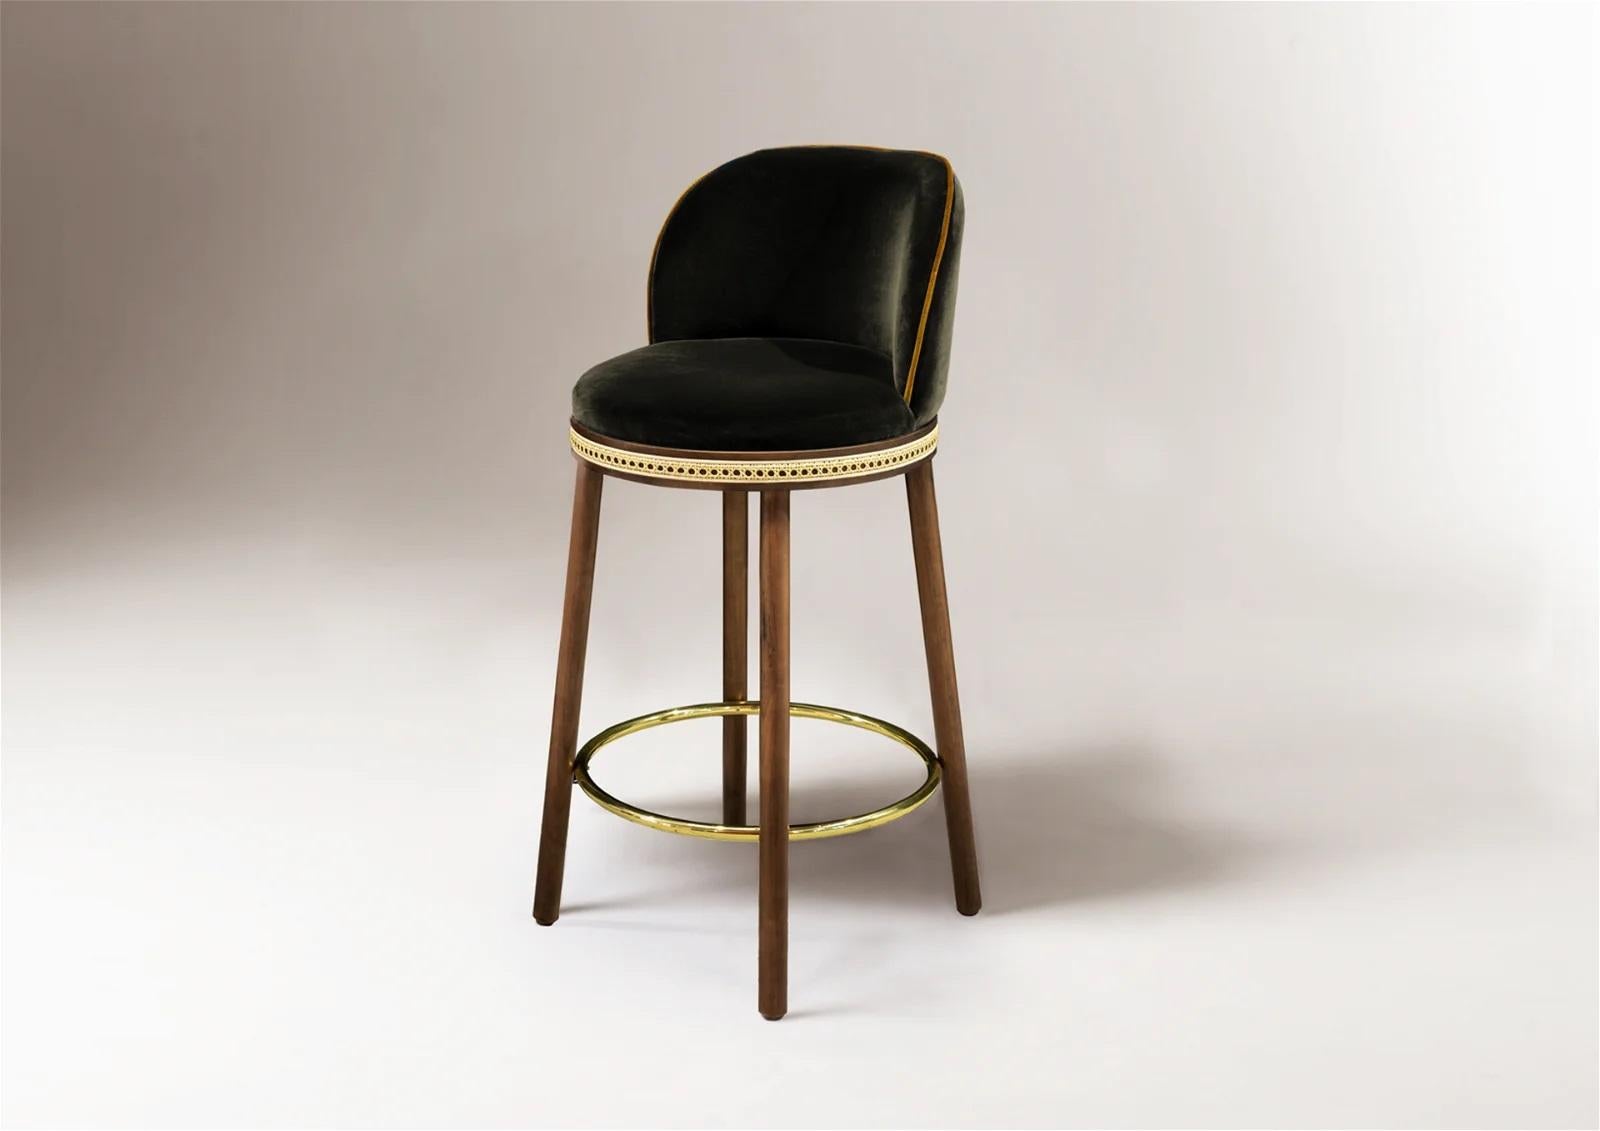 DOOQ Mid-Century Modern Counter Chair Alma with Dark Brown Velvet, Walnut Wood

In a piece that combines classic and modern aesthetics we can find a certain harmonic gracefulness paired with an intimate voluptuousness that can embrace you and